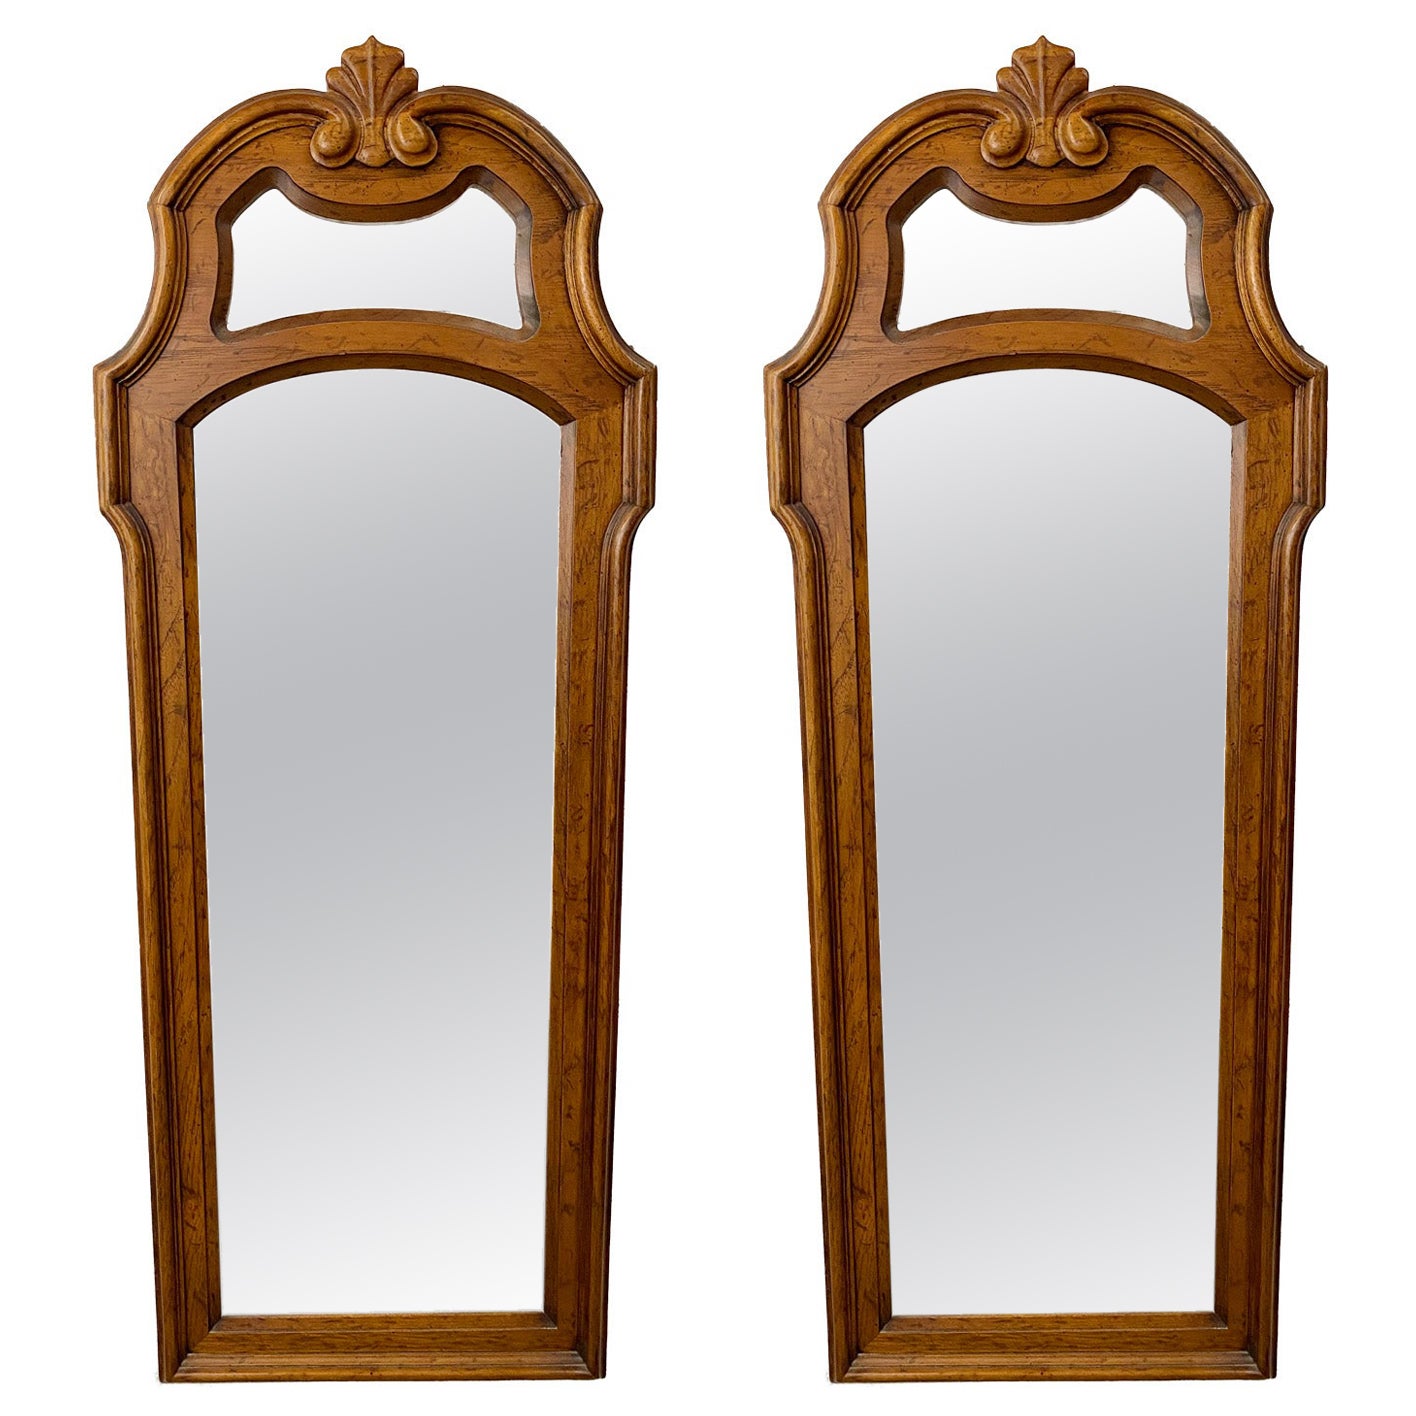 French Provincial Style Pine Wood Wall Tall Mirror by Drexel, a Pair For Sale